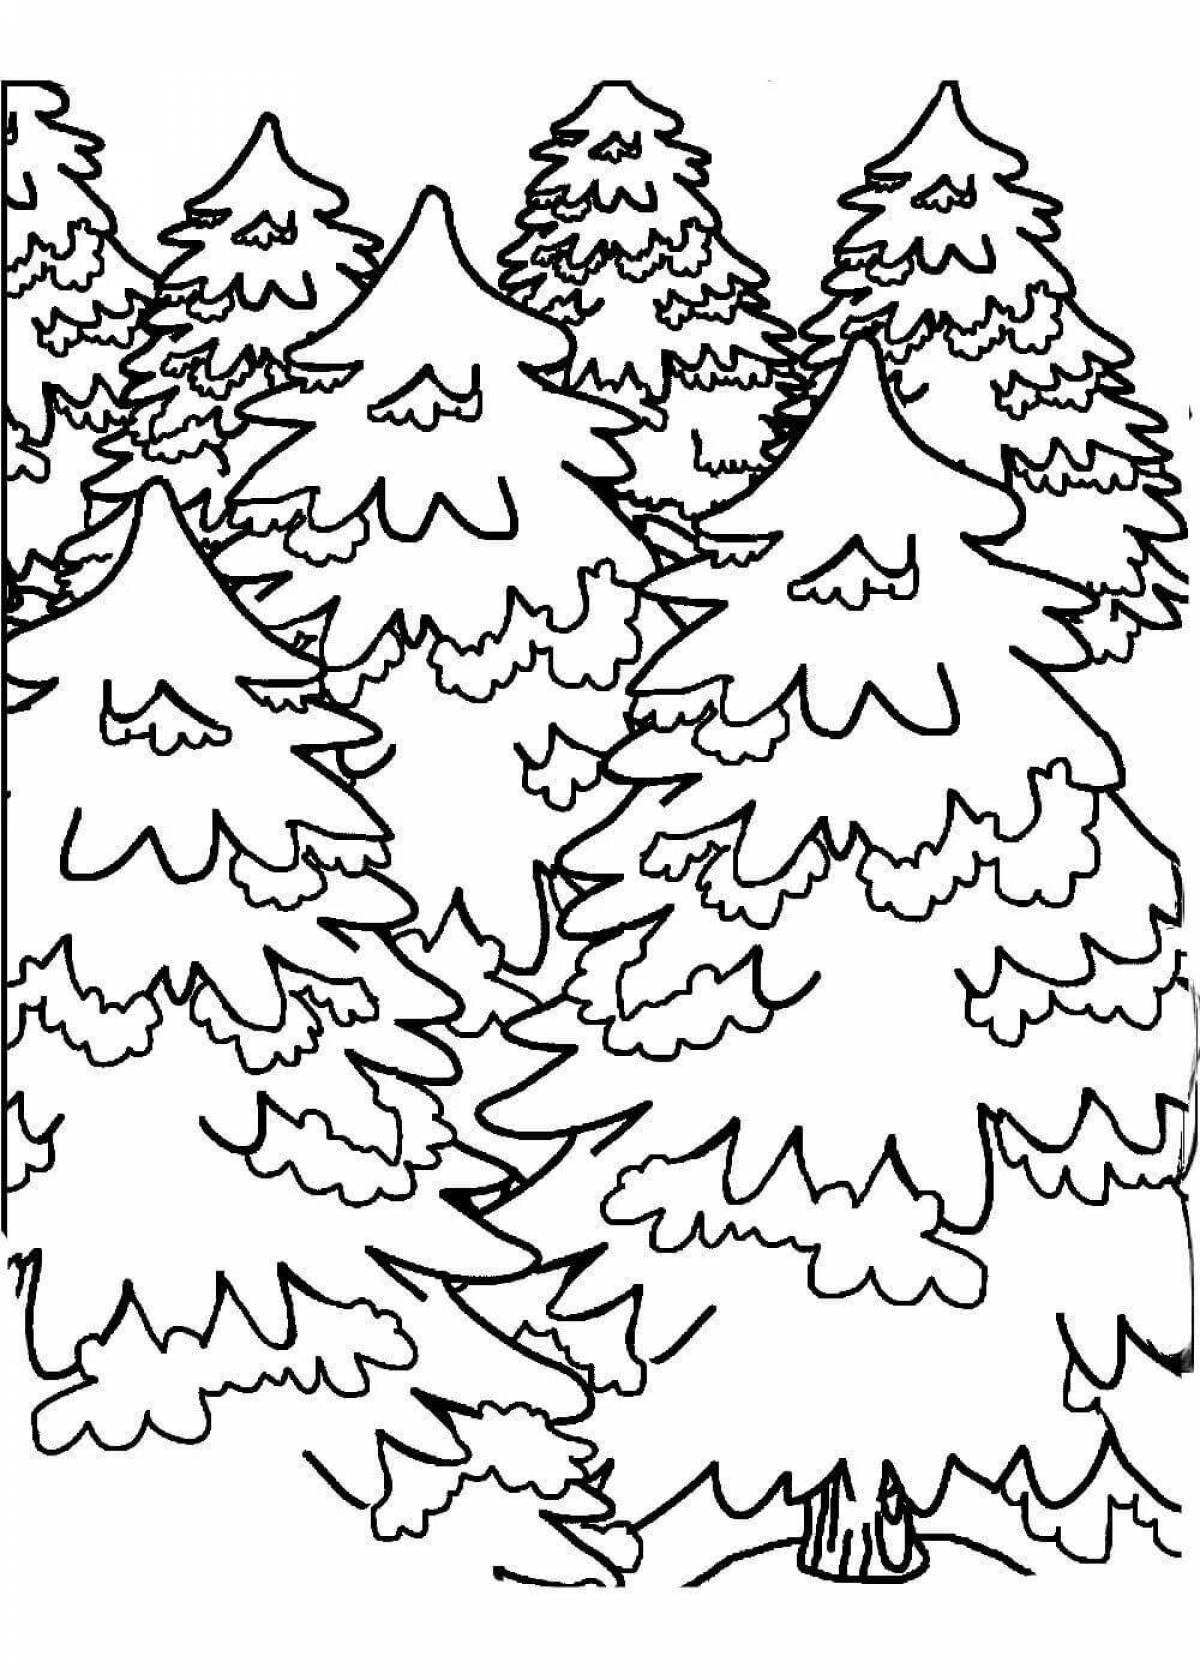 Coniferous forest majestic coloring book